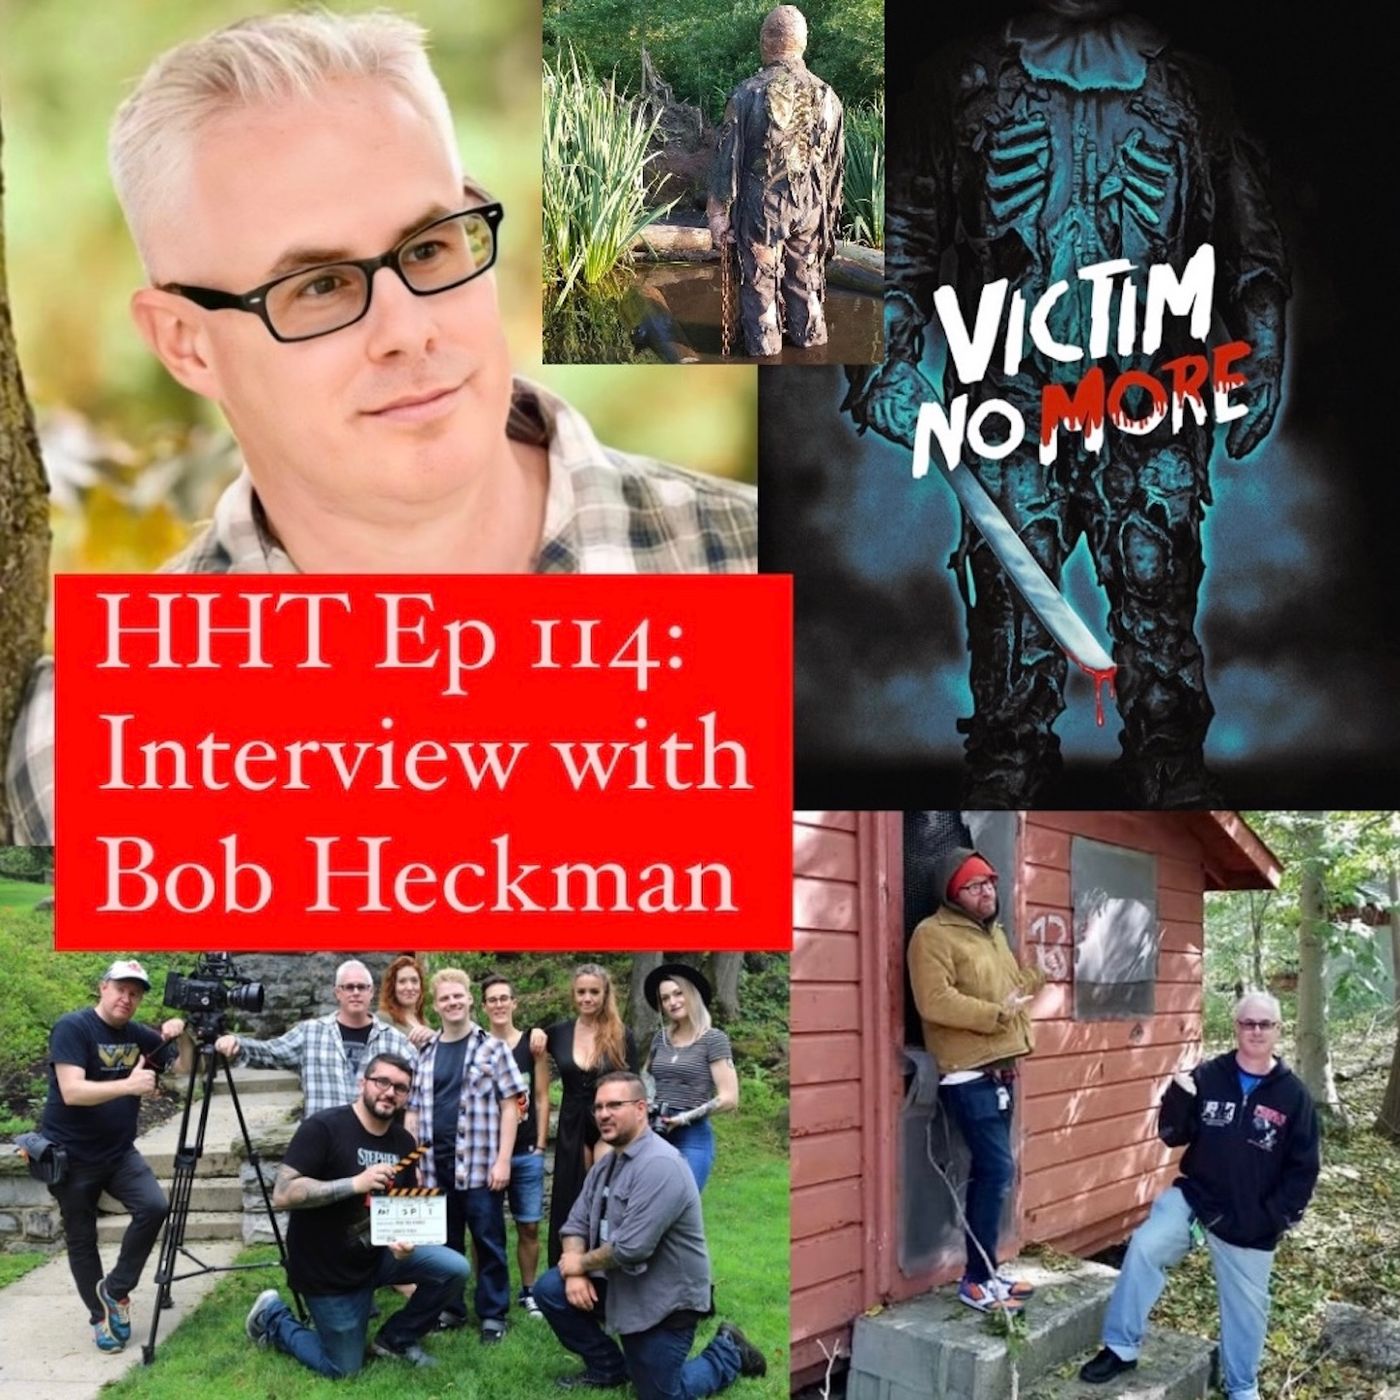 Ep 114: Interview w/Bob Heckman, Writer/Director of “Victim No More” Image